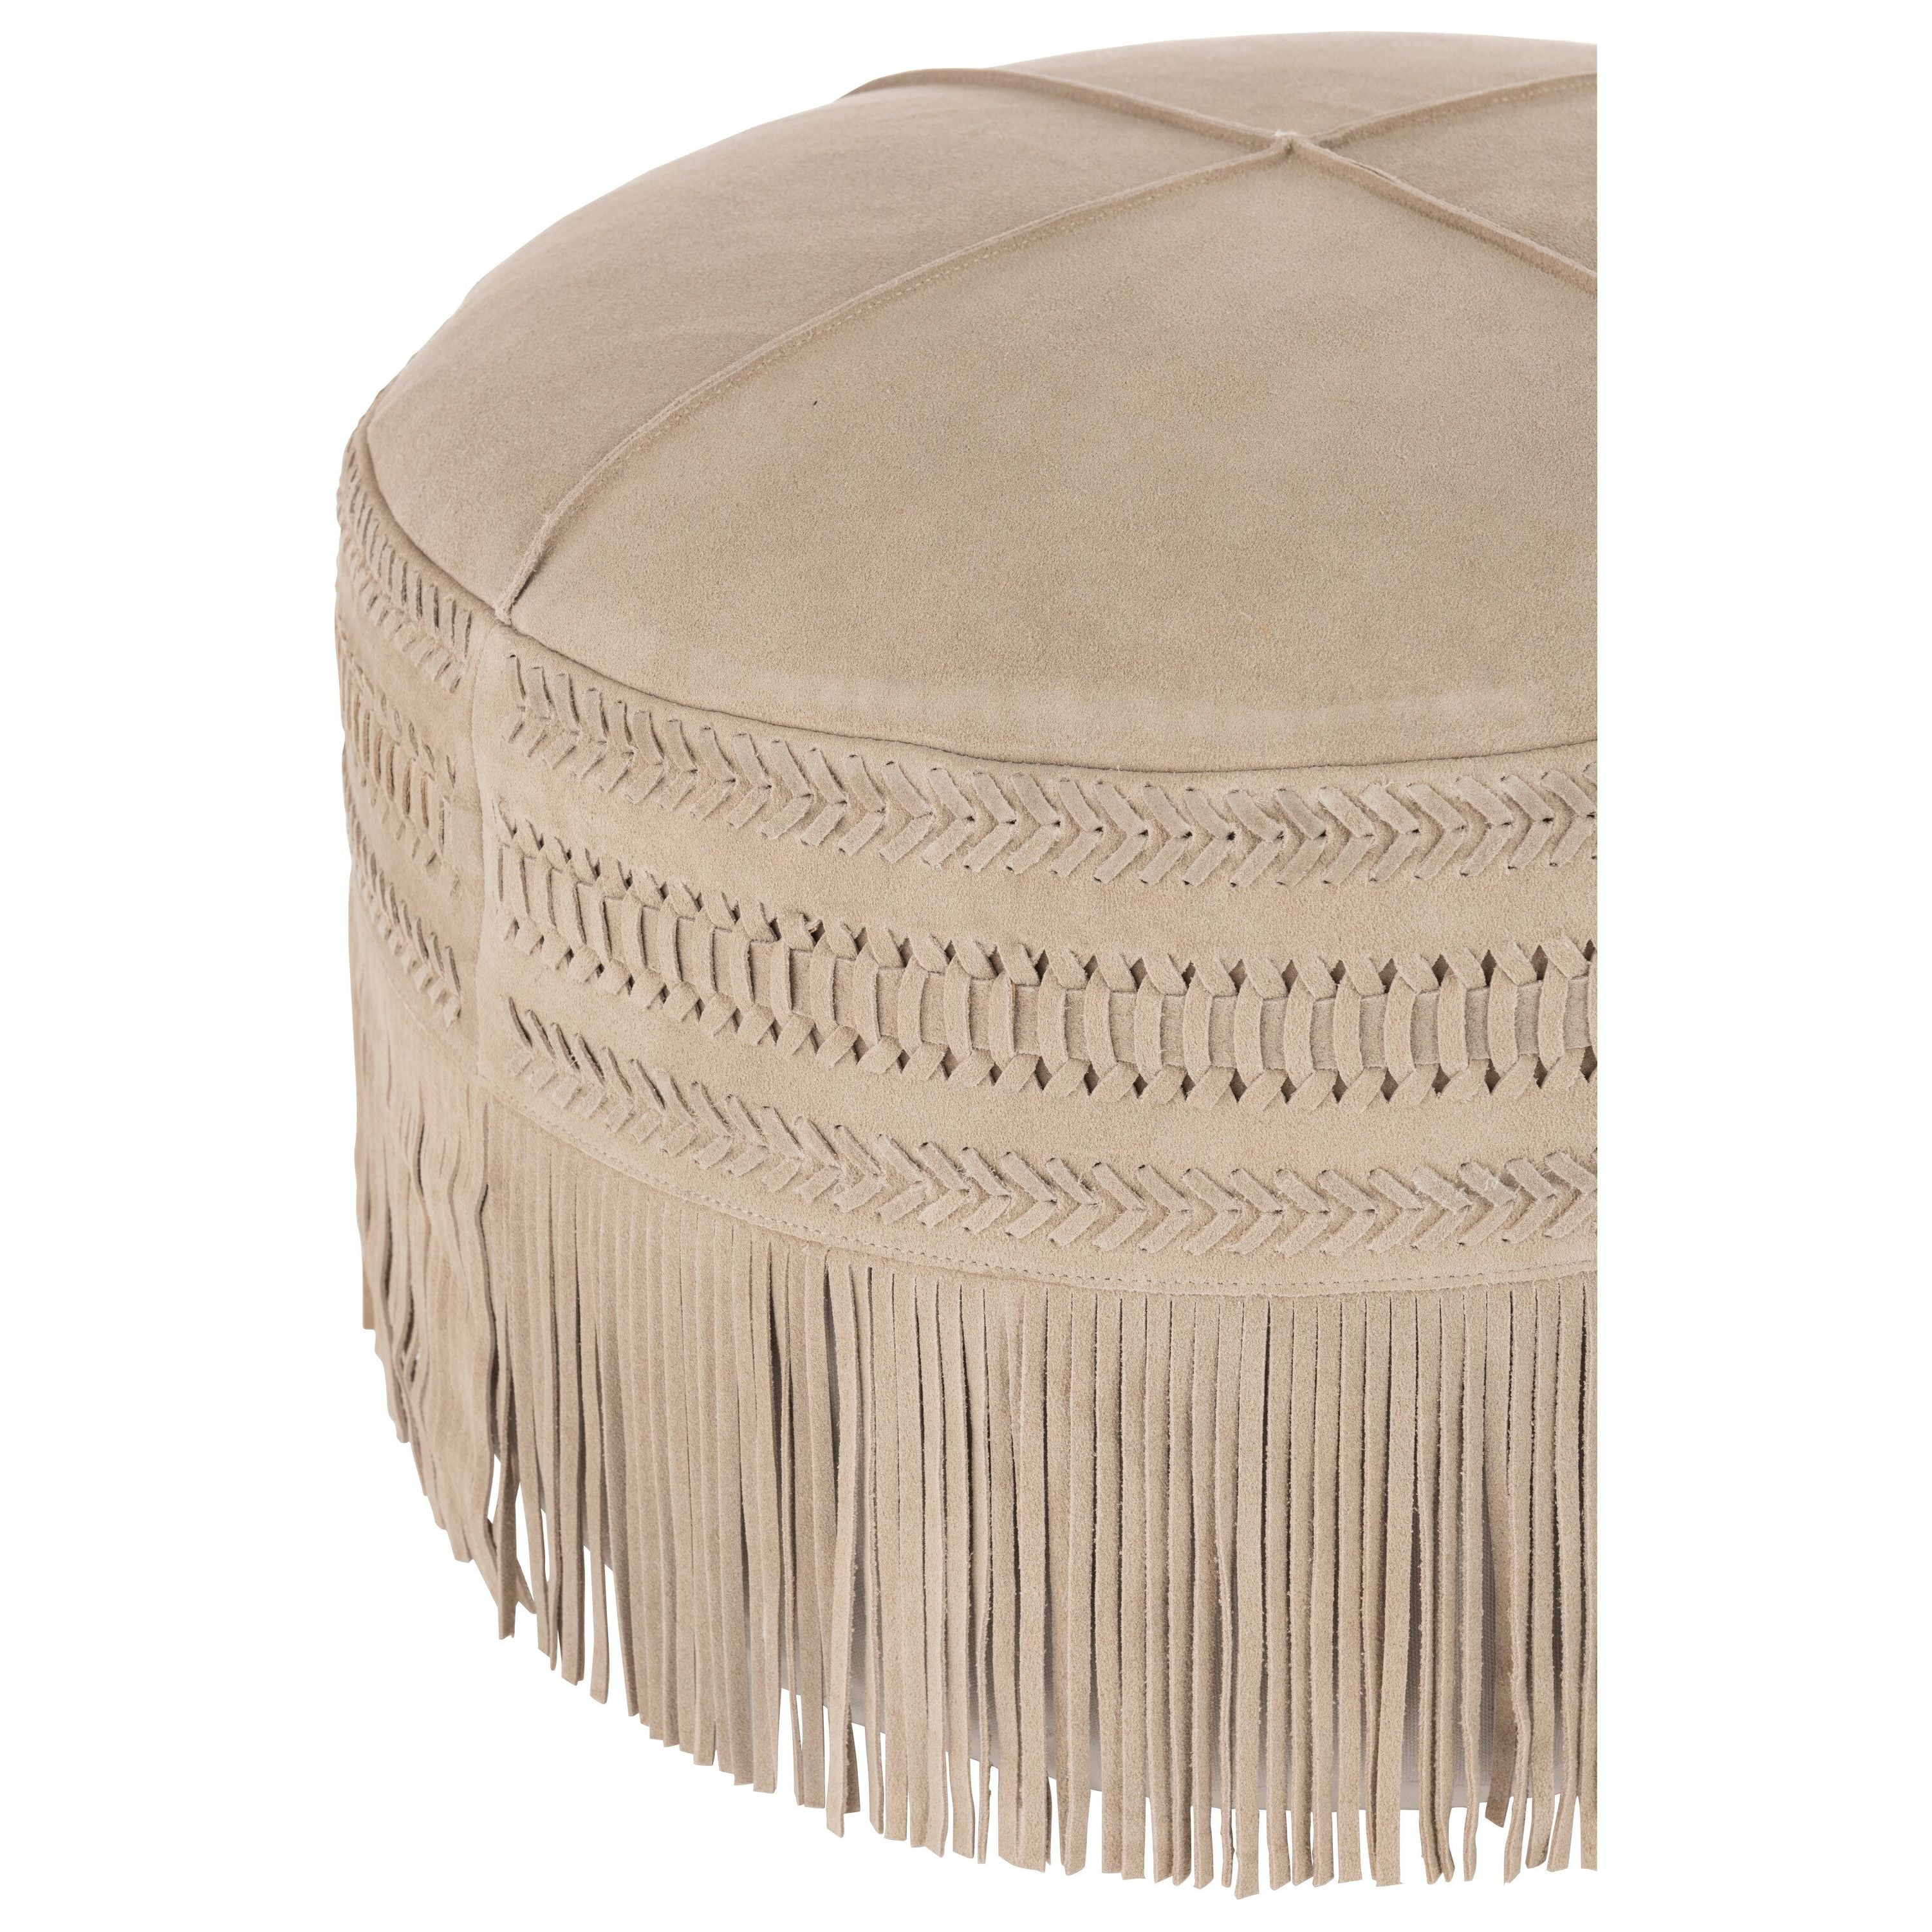 Pouf Fringes Round Leather Light Gray